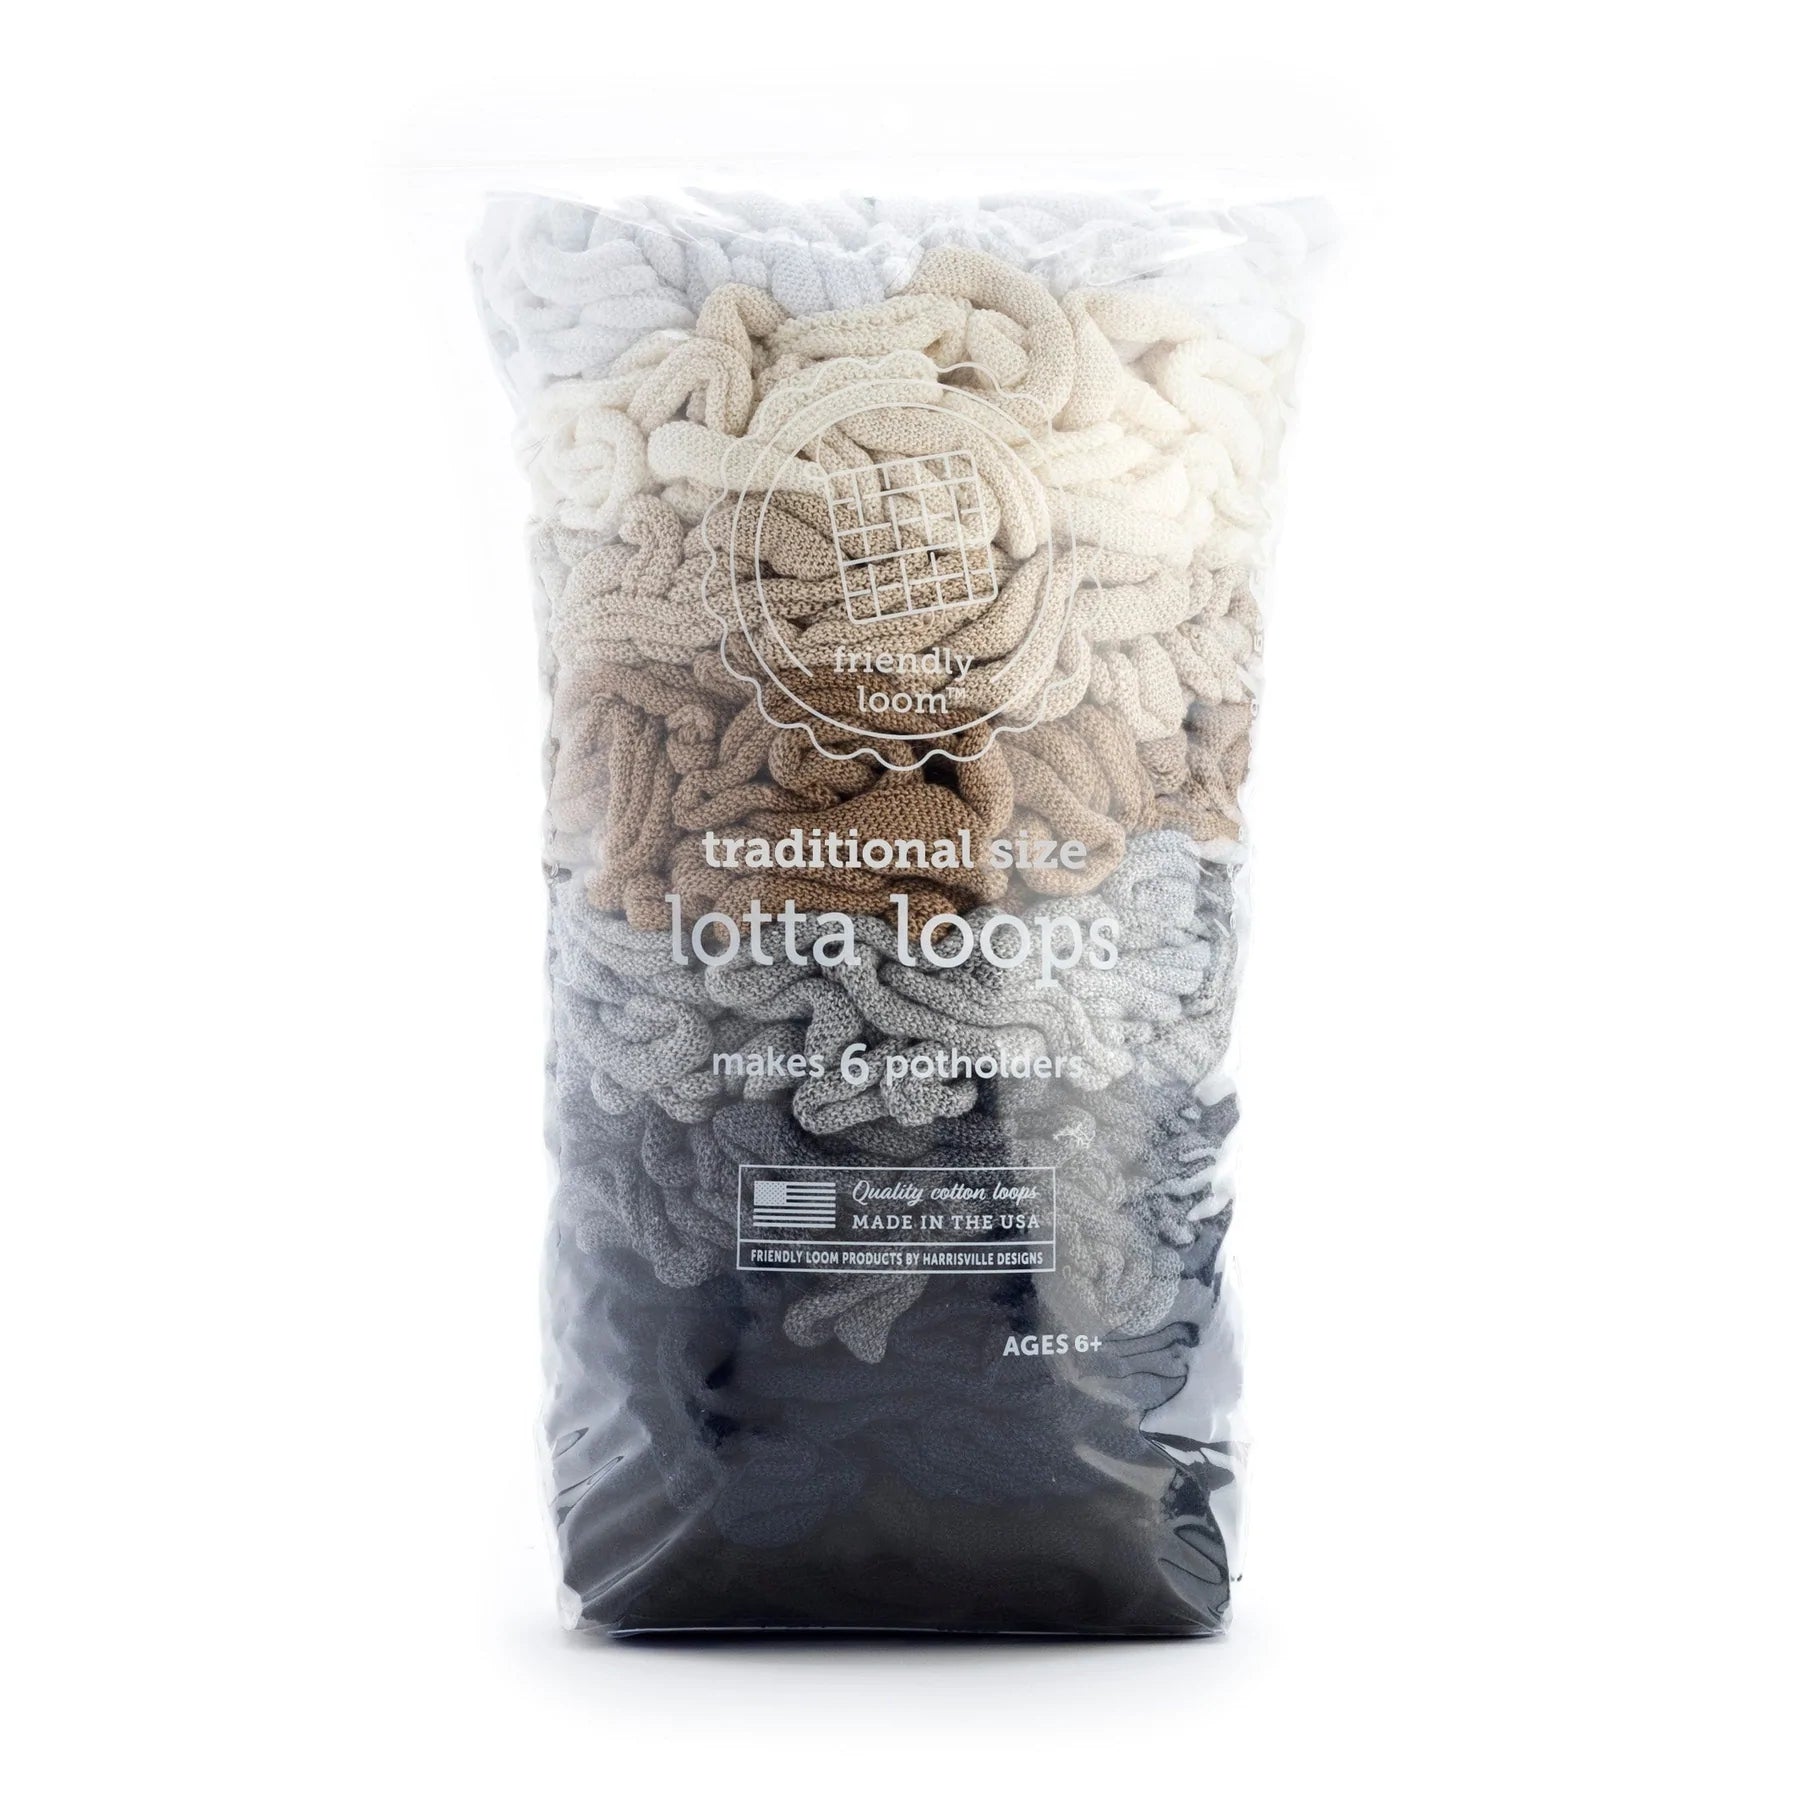 Lotta Loops - Traditional and Pro Sizes – Green Mountain Yarn & Fiber